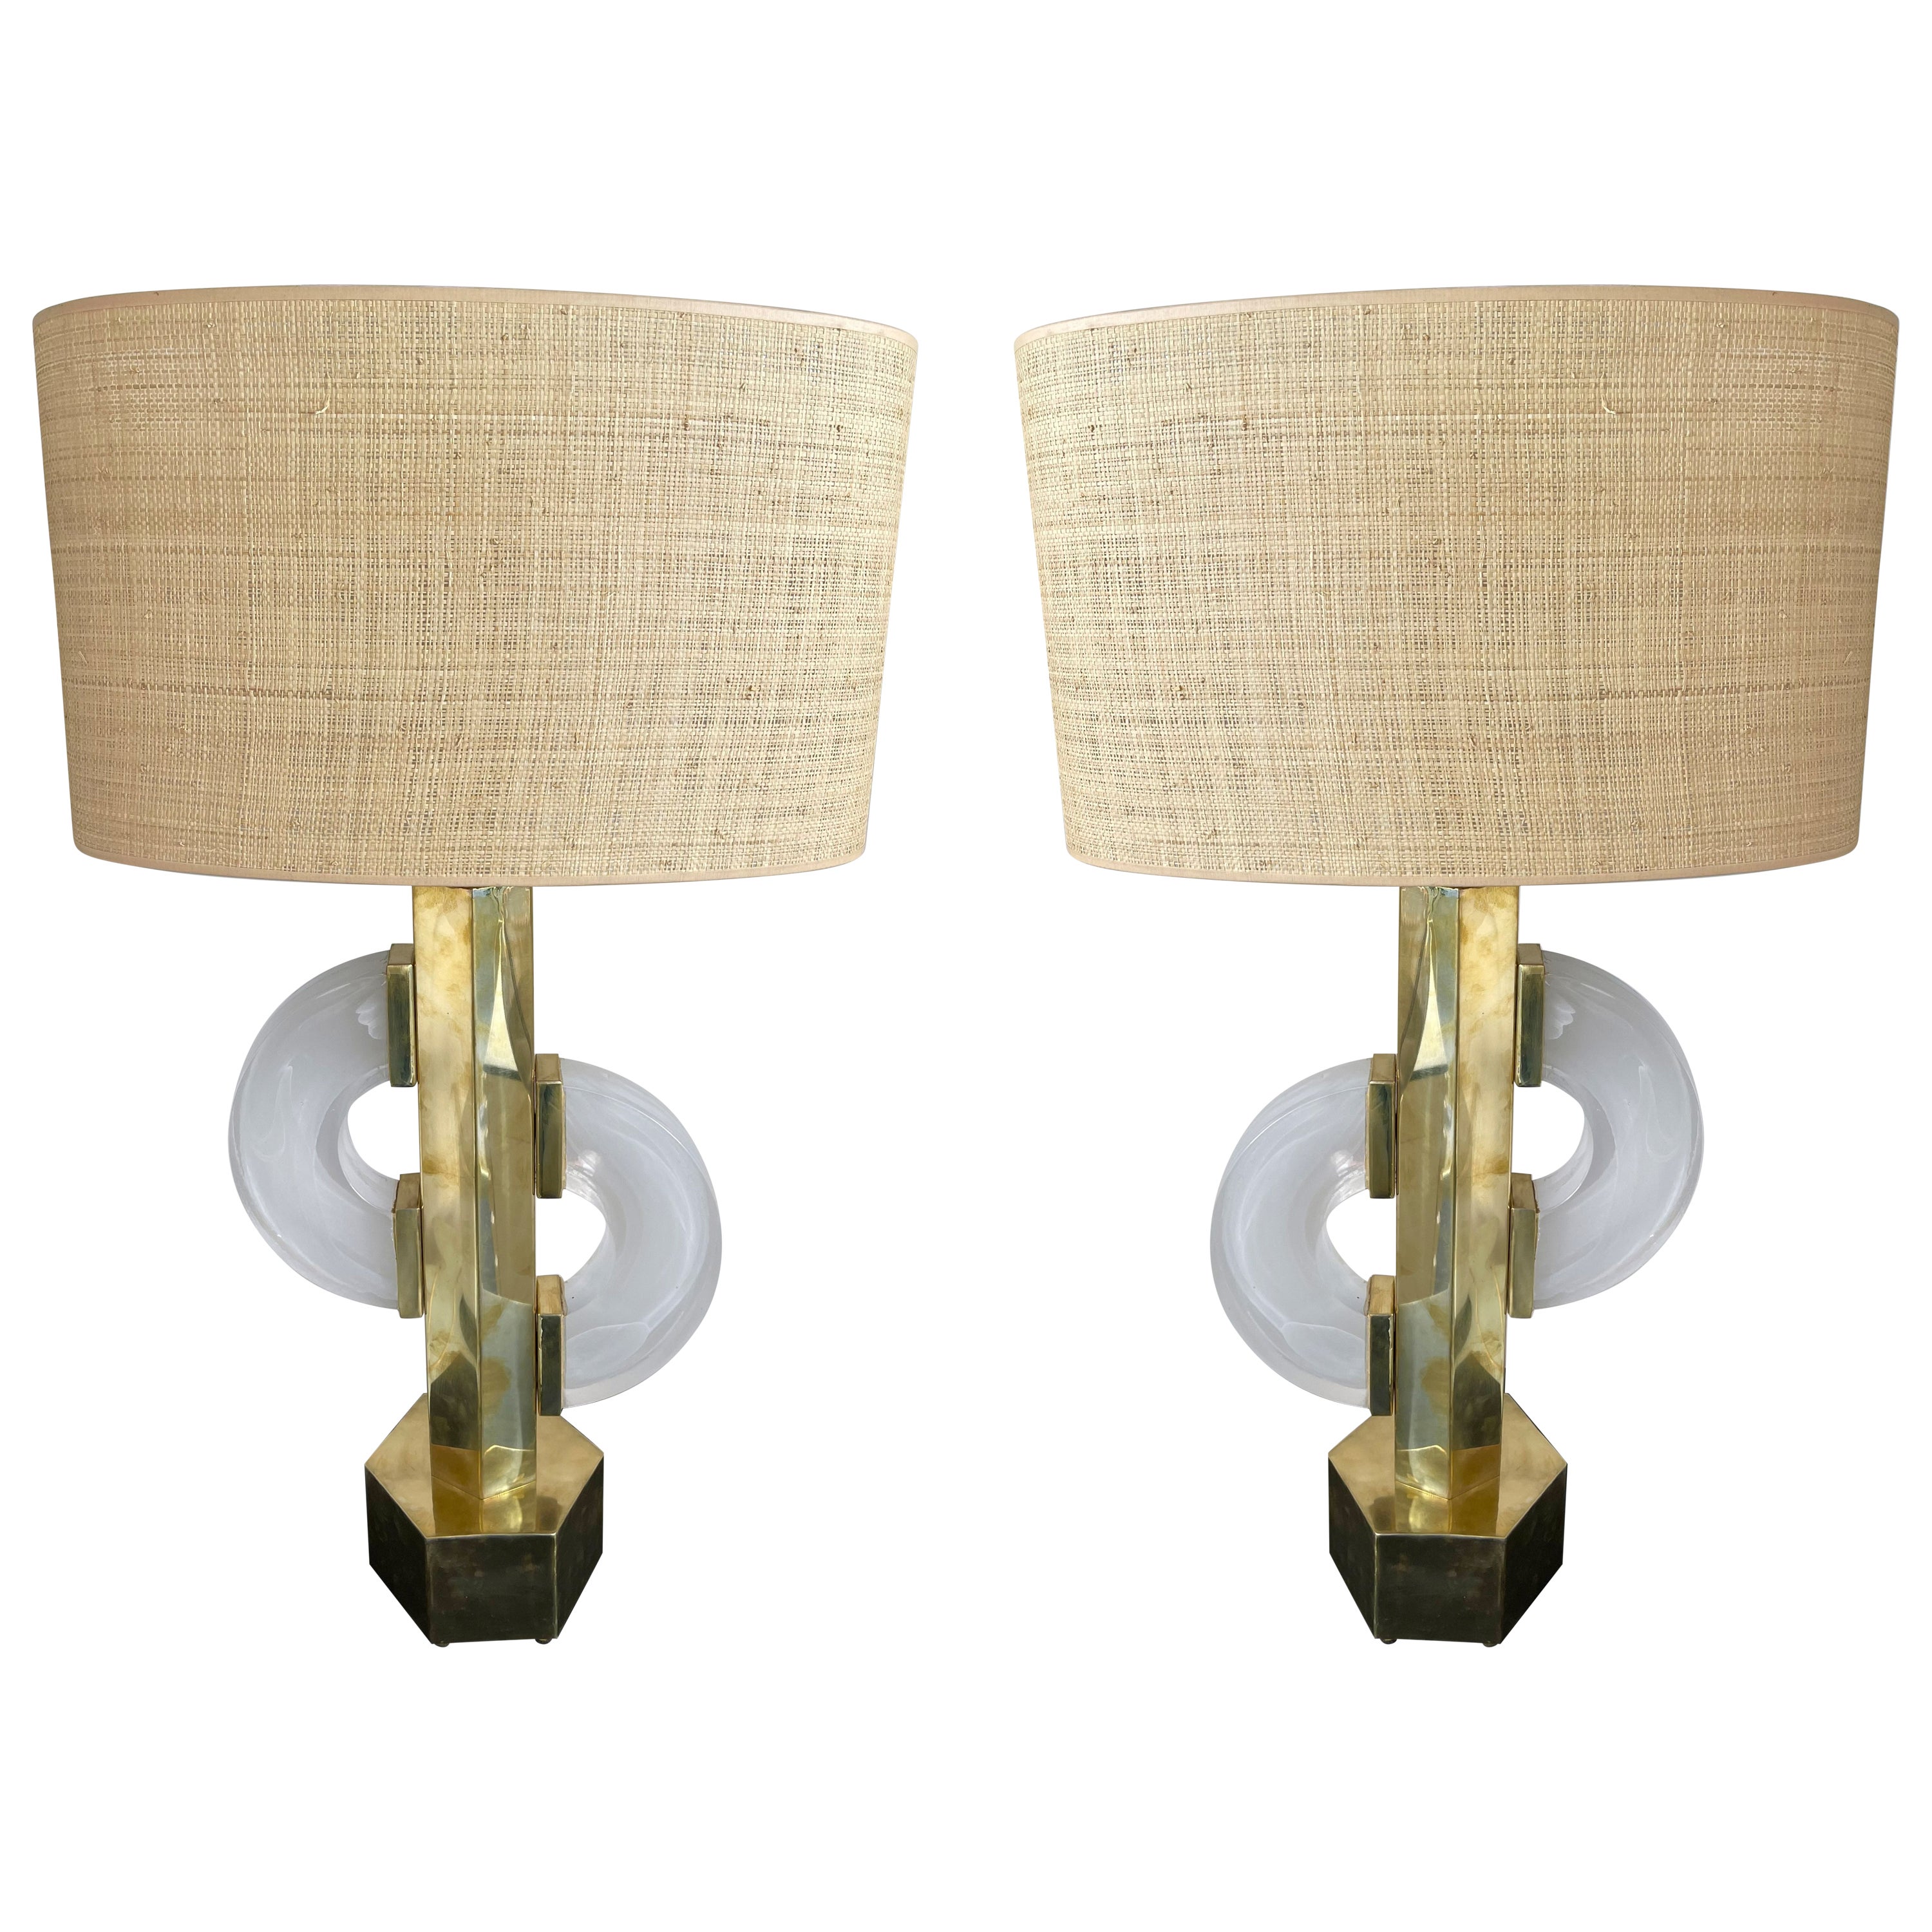 Contemporary Pair of Brass Double C Murano Glass Lamps, Italy